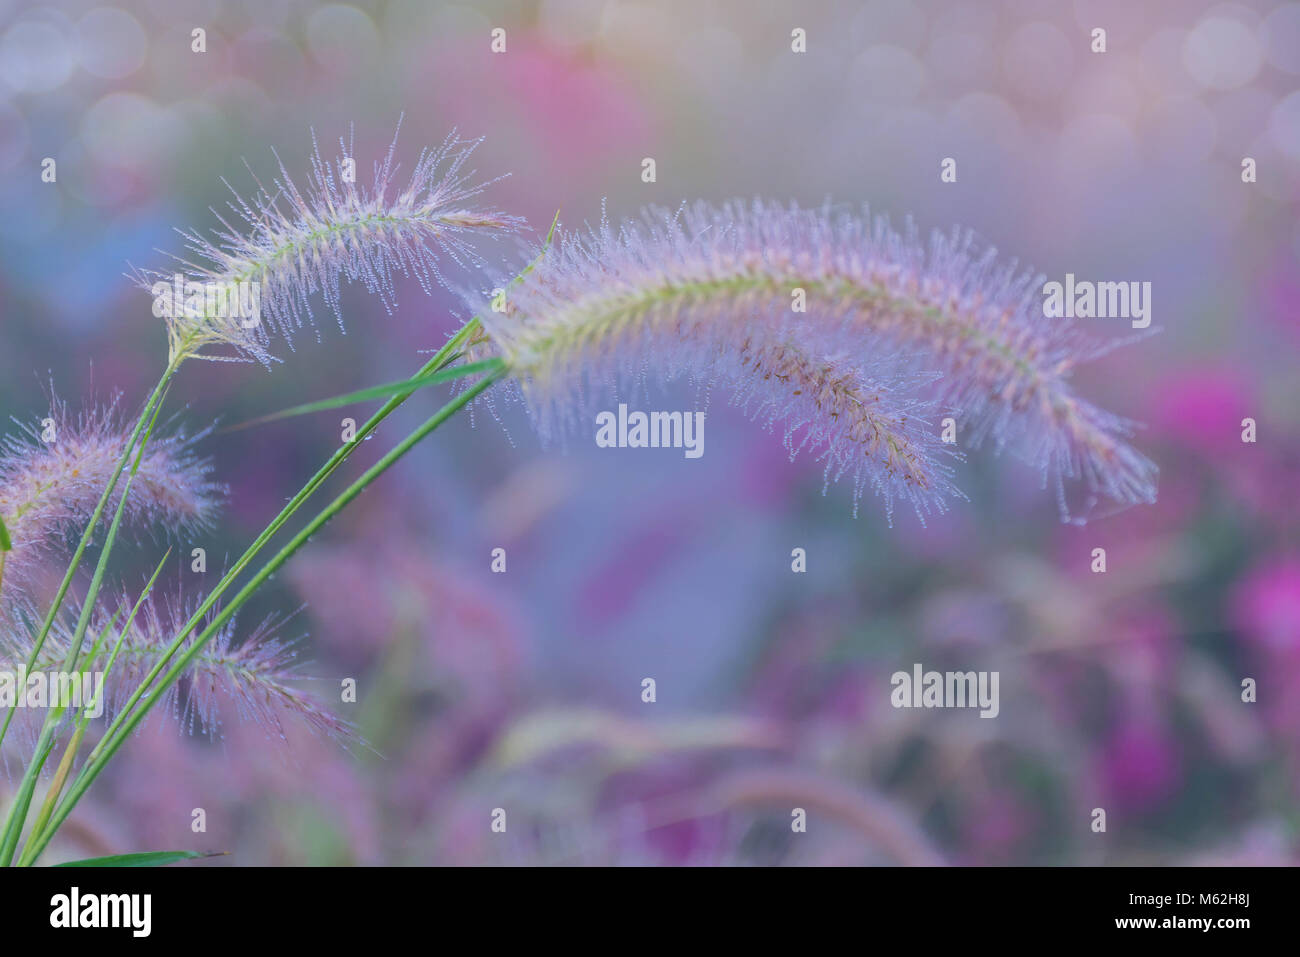 Soft focus colorful of desho grass, desho, Pennisetum, Brachiaria mutica, Para Grass, Mauritius Grass, Poaceae, flower with dew and fog in the morning Stock Photo